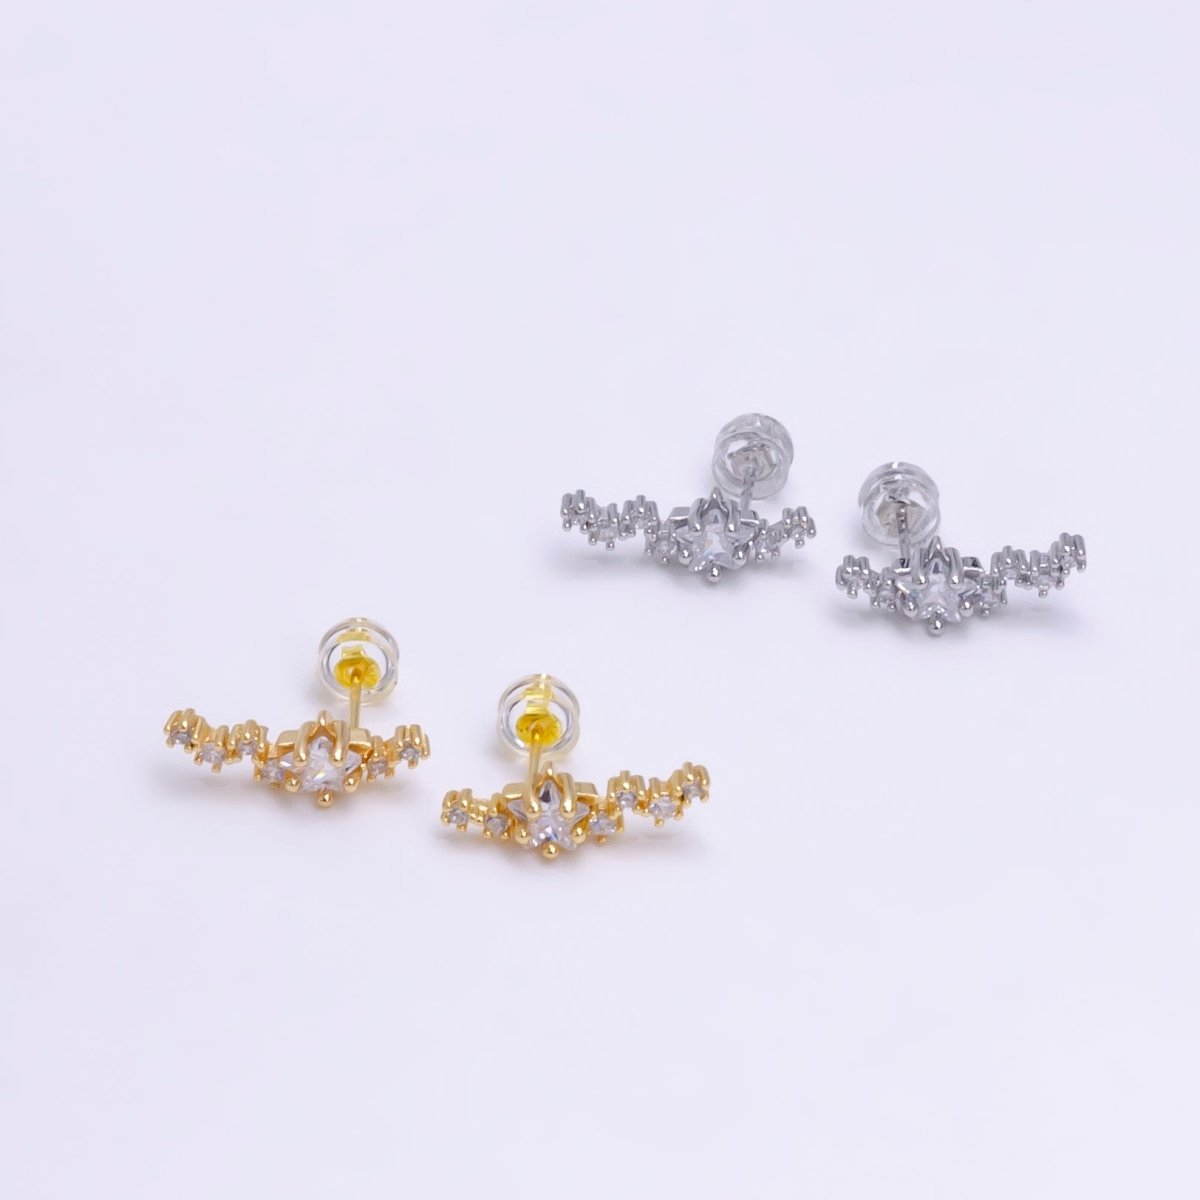 Single Star on Crystal Chain Studs Earring, CZ Stone on Daily Wear Formal/Casual Earring Jewelry V-080 V-081 - DLUXCA